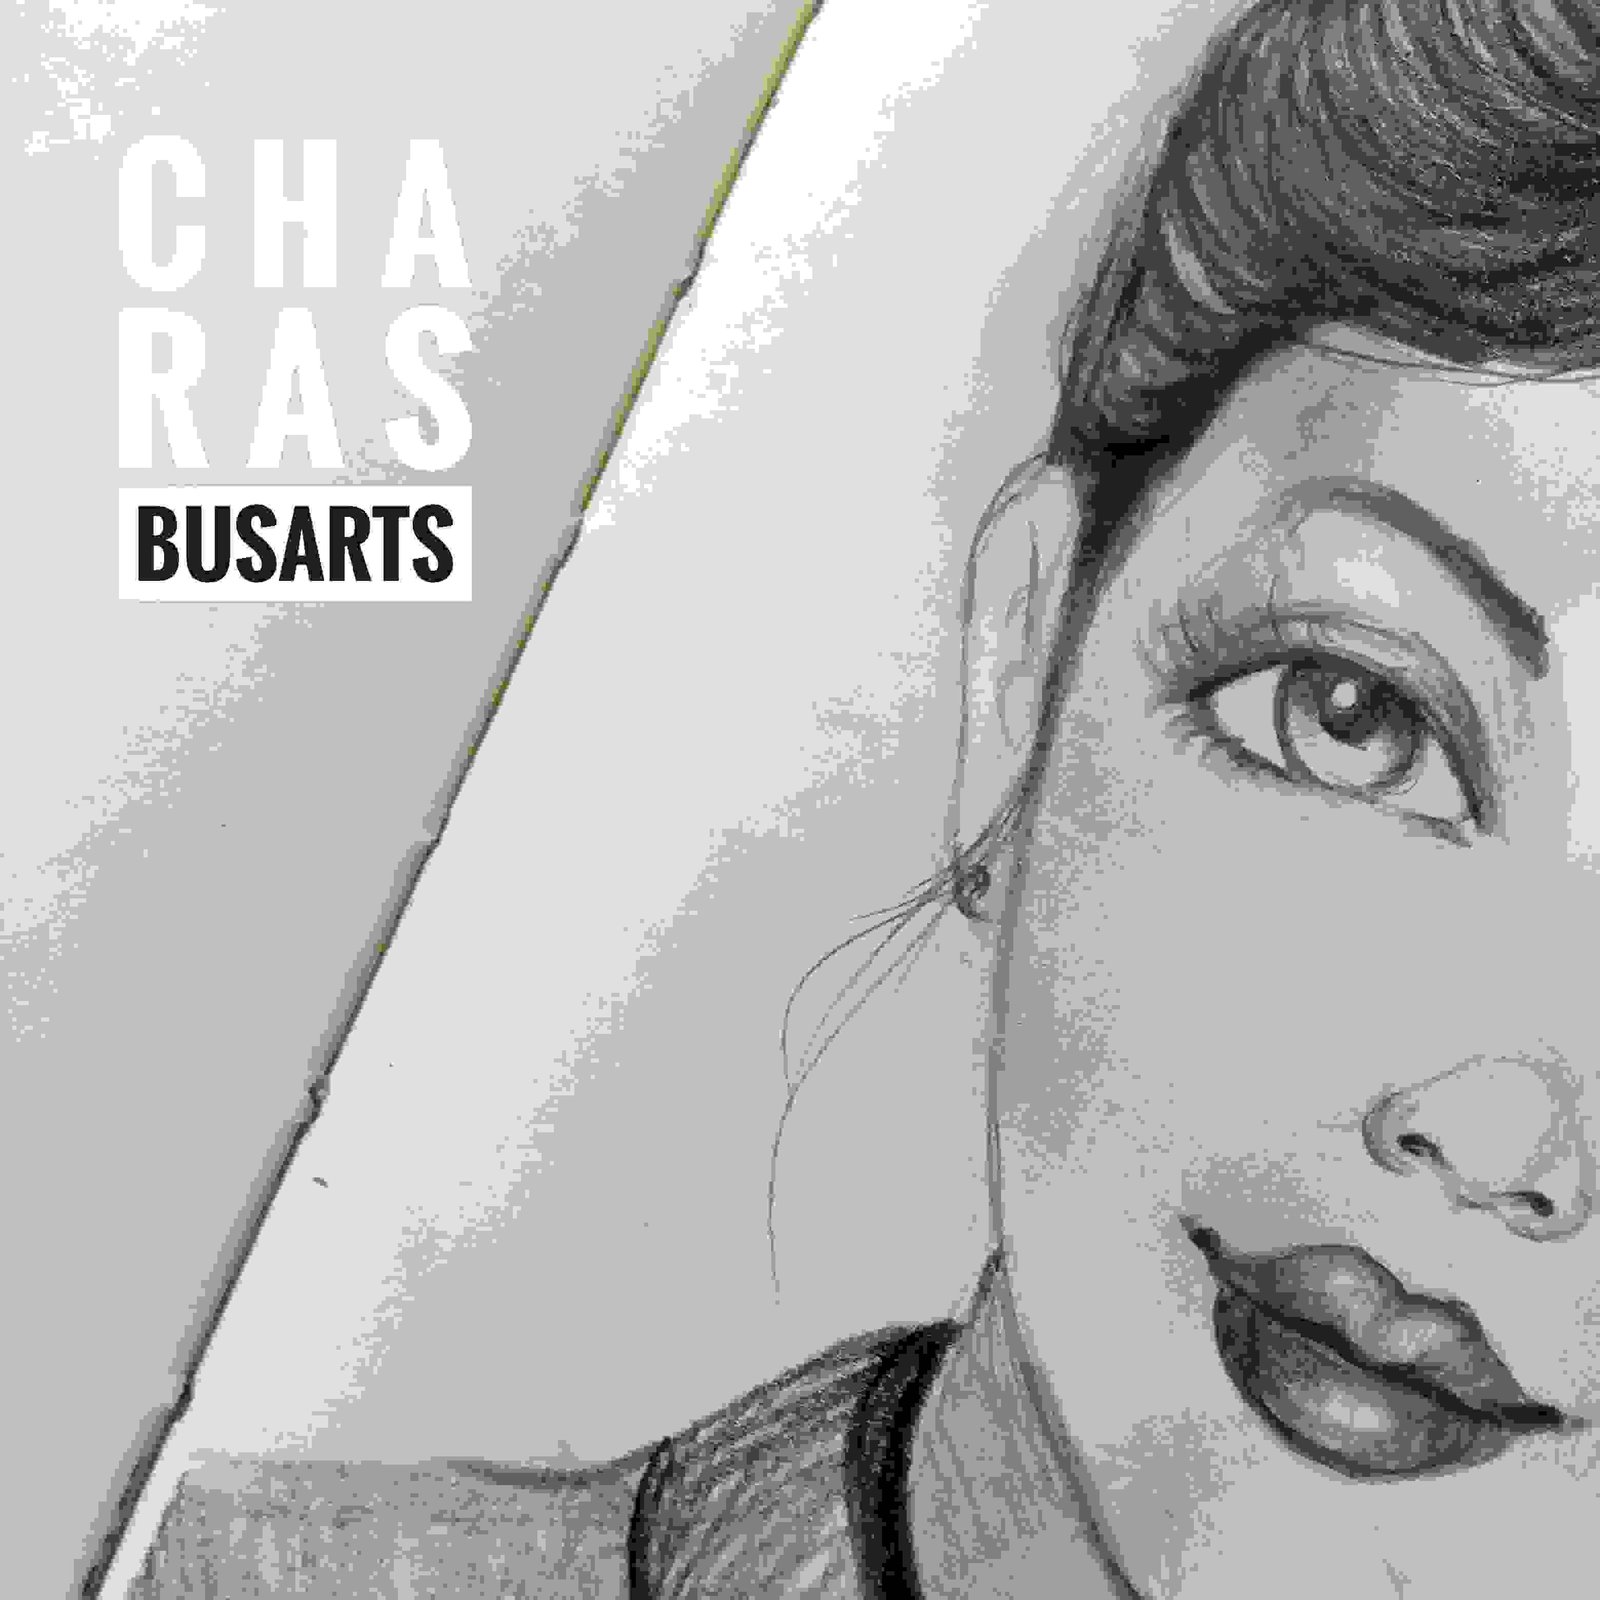 Hi All Busarts By Charasarts I Draw This While Traveling